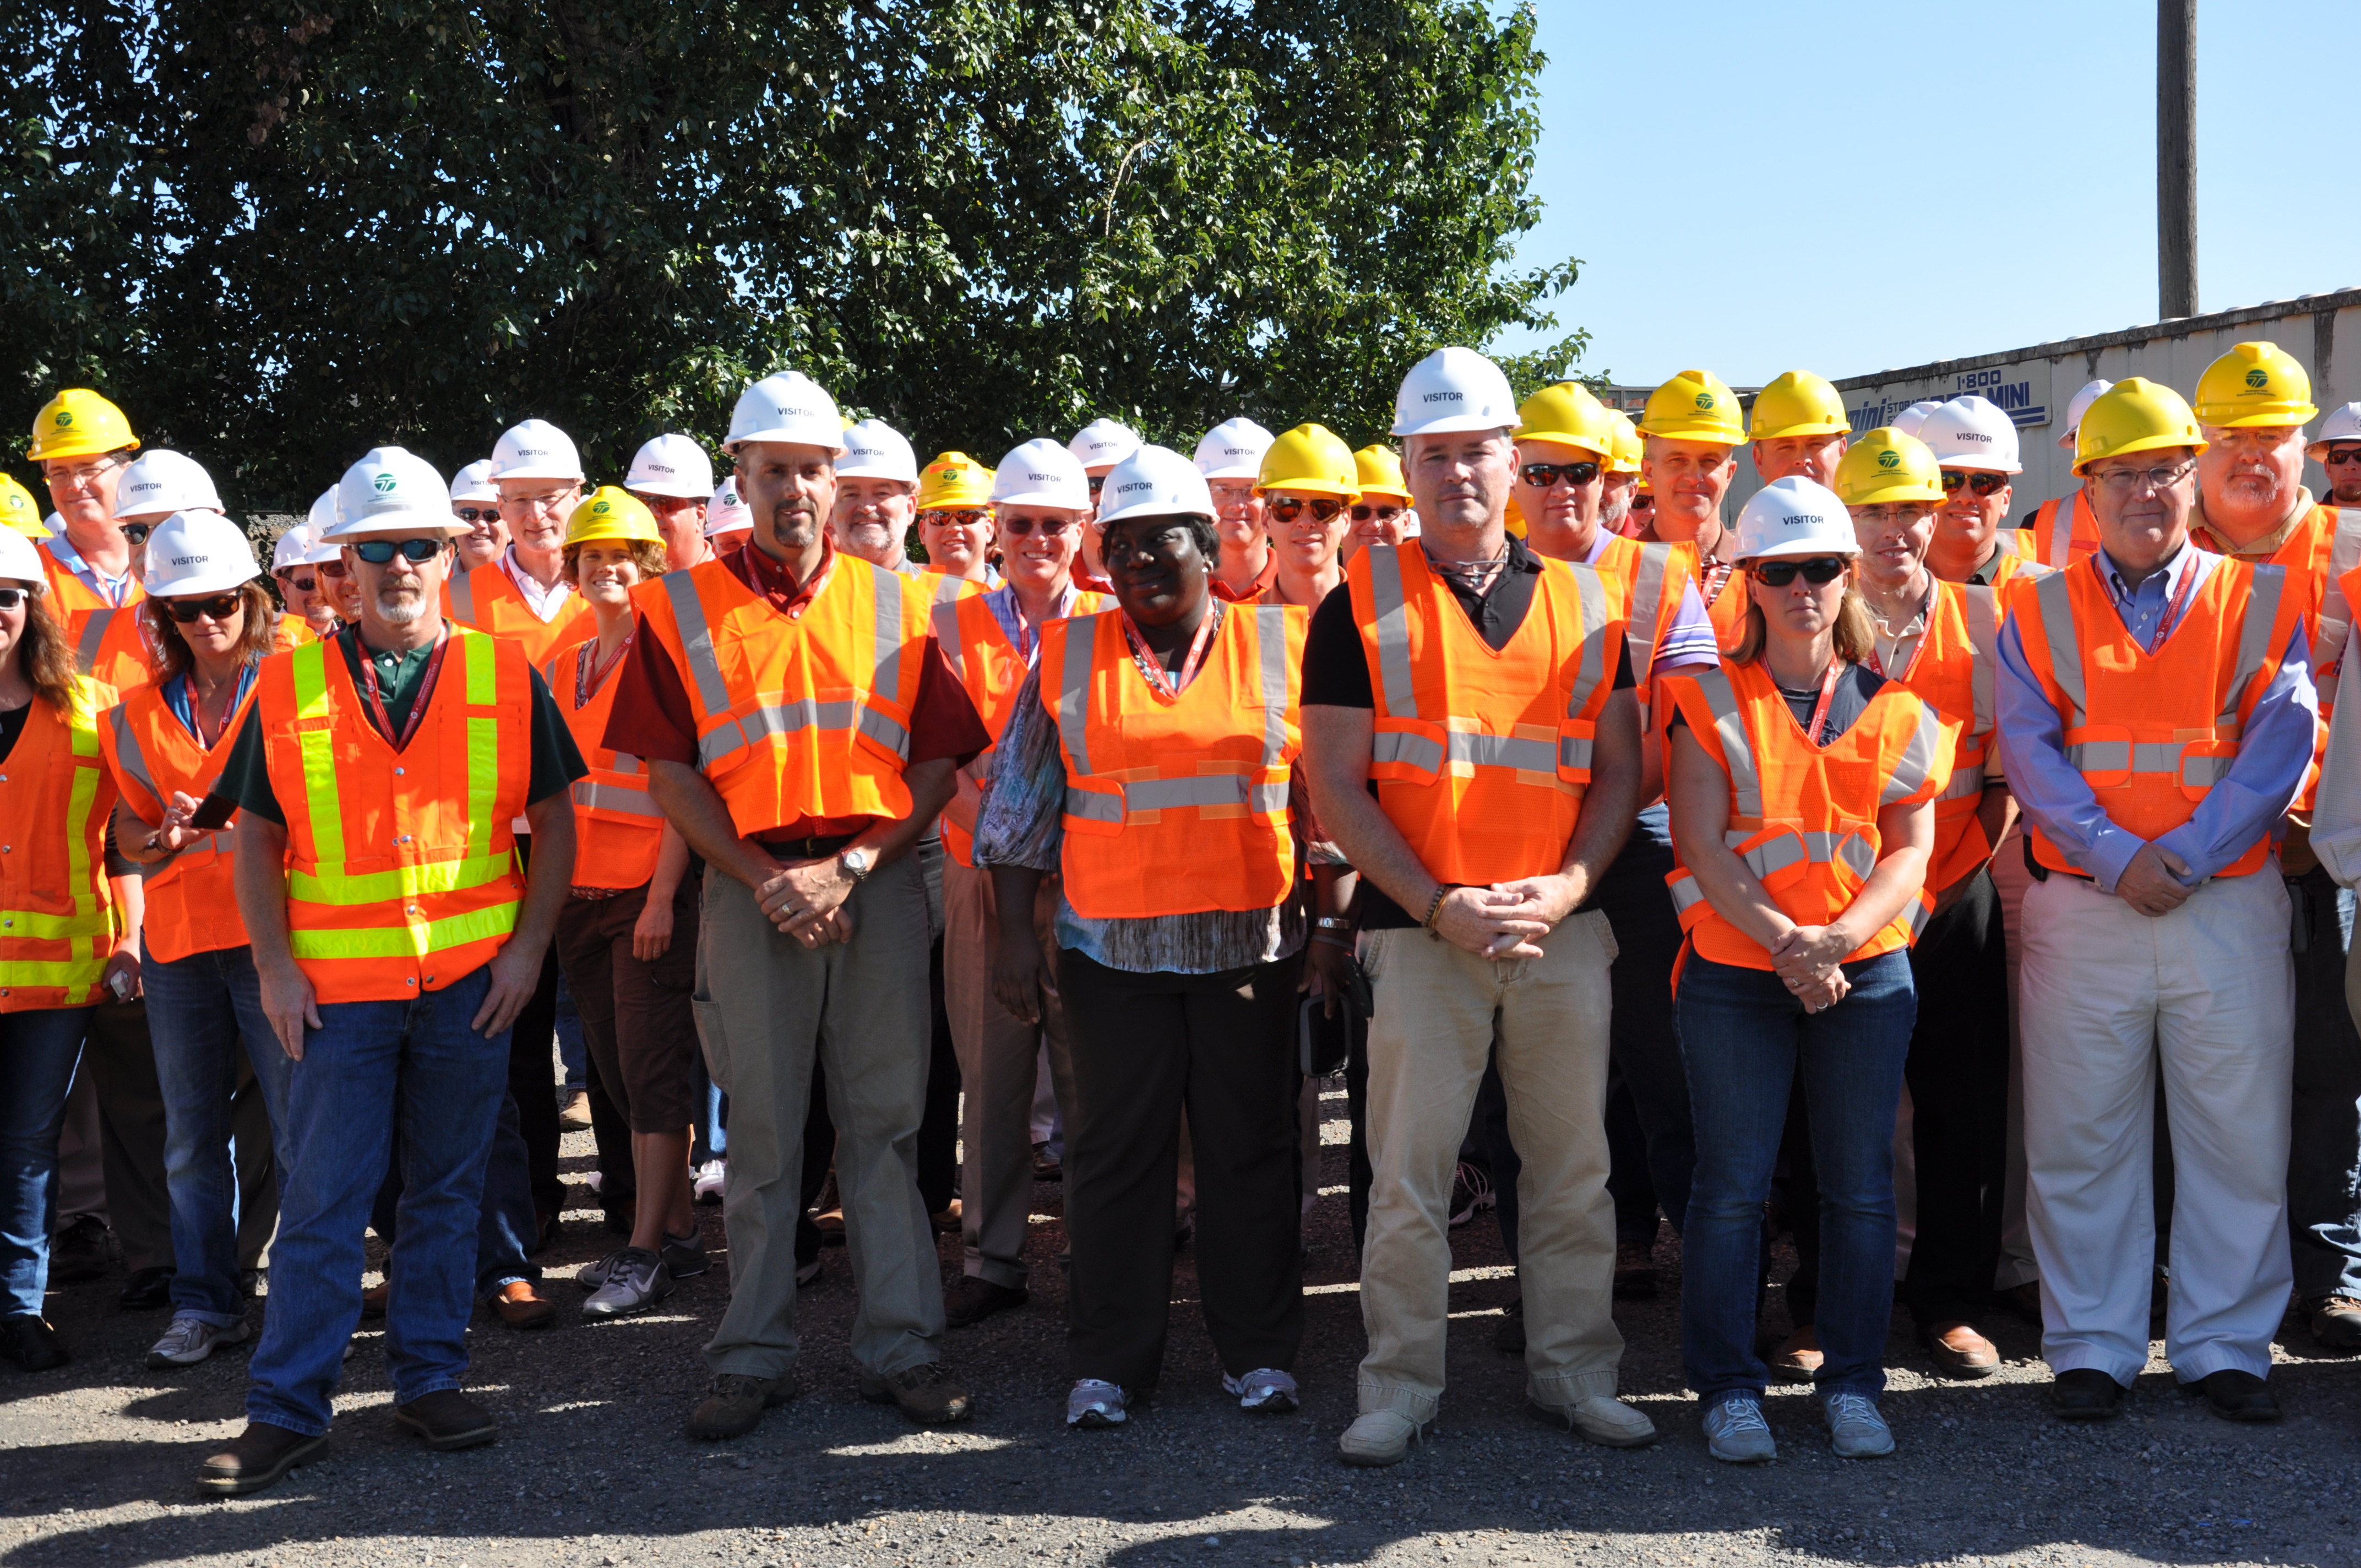 Group of people at a site tour wearing hard hats and reflective vests